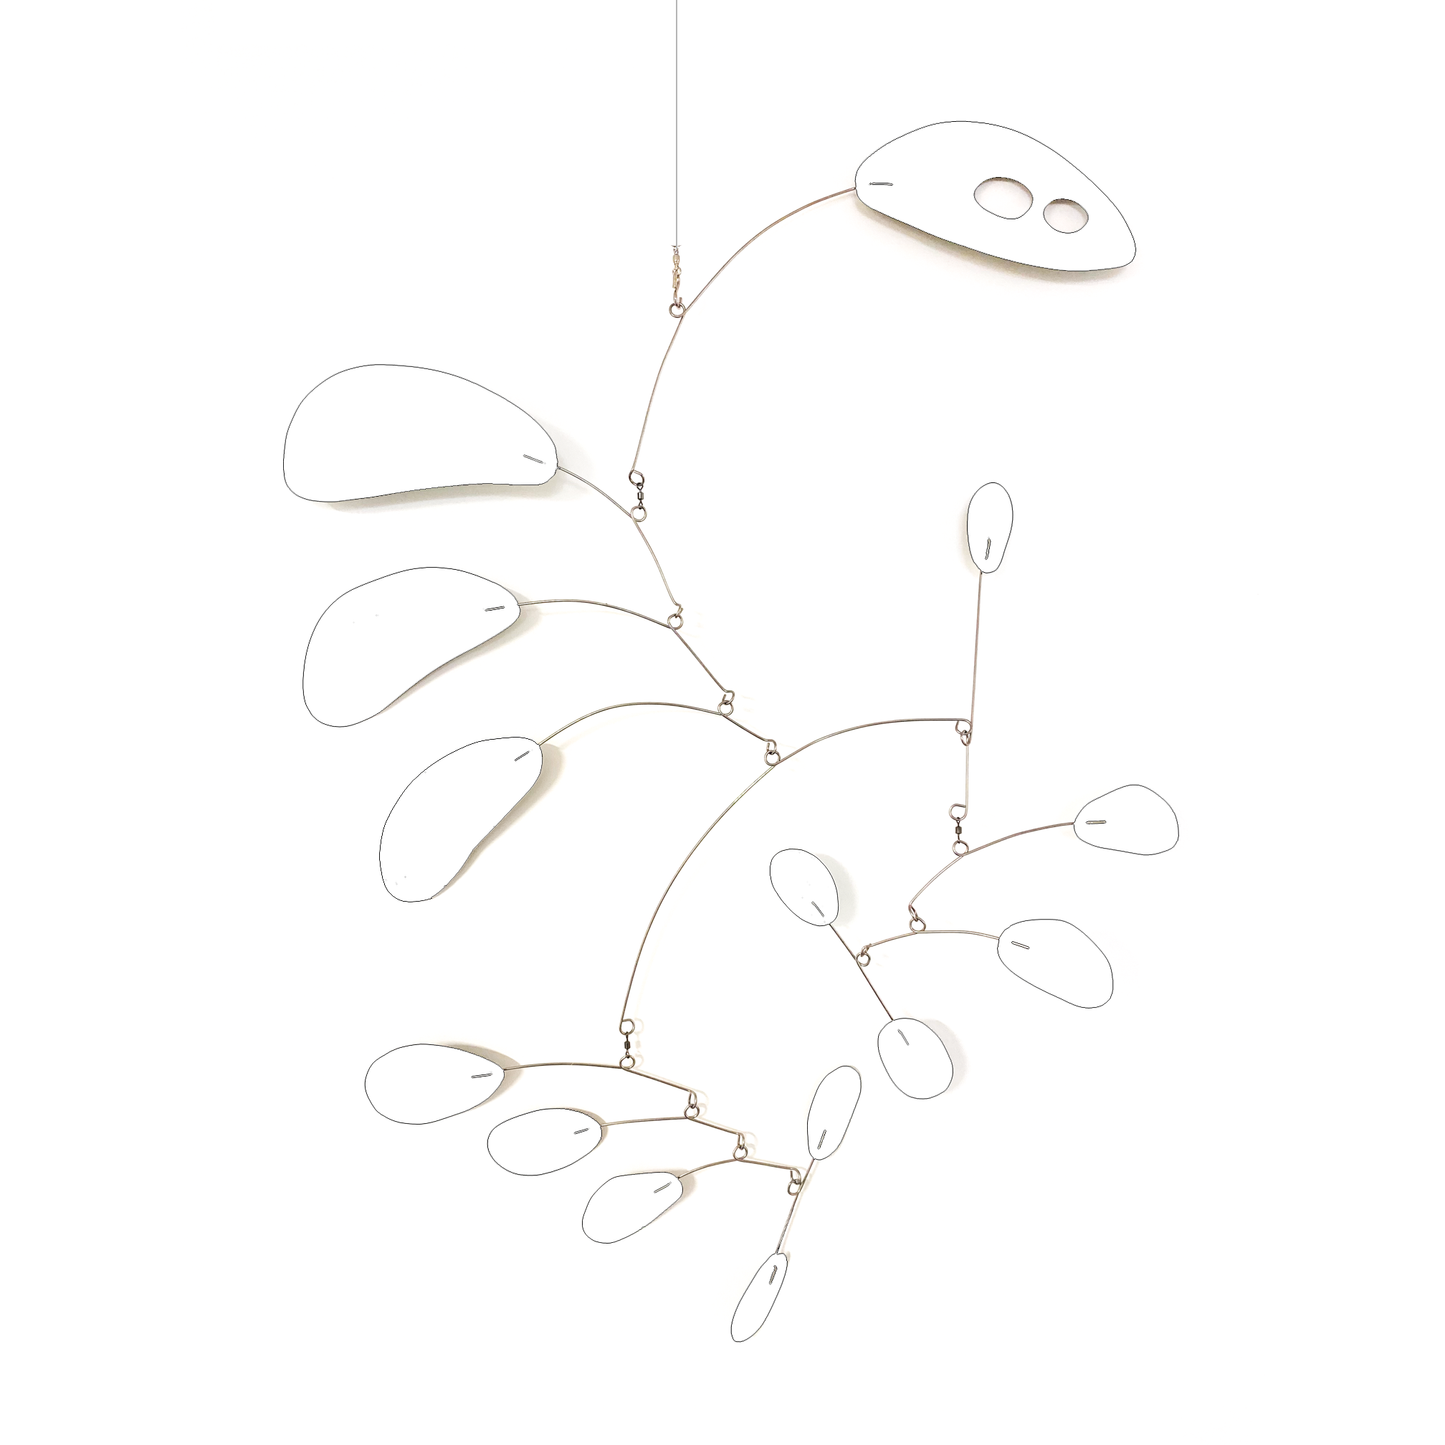 CoolCat mid century modern inspired hanging kinetic art mobile in all white by AtomicMobiles.com